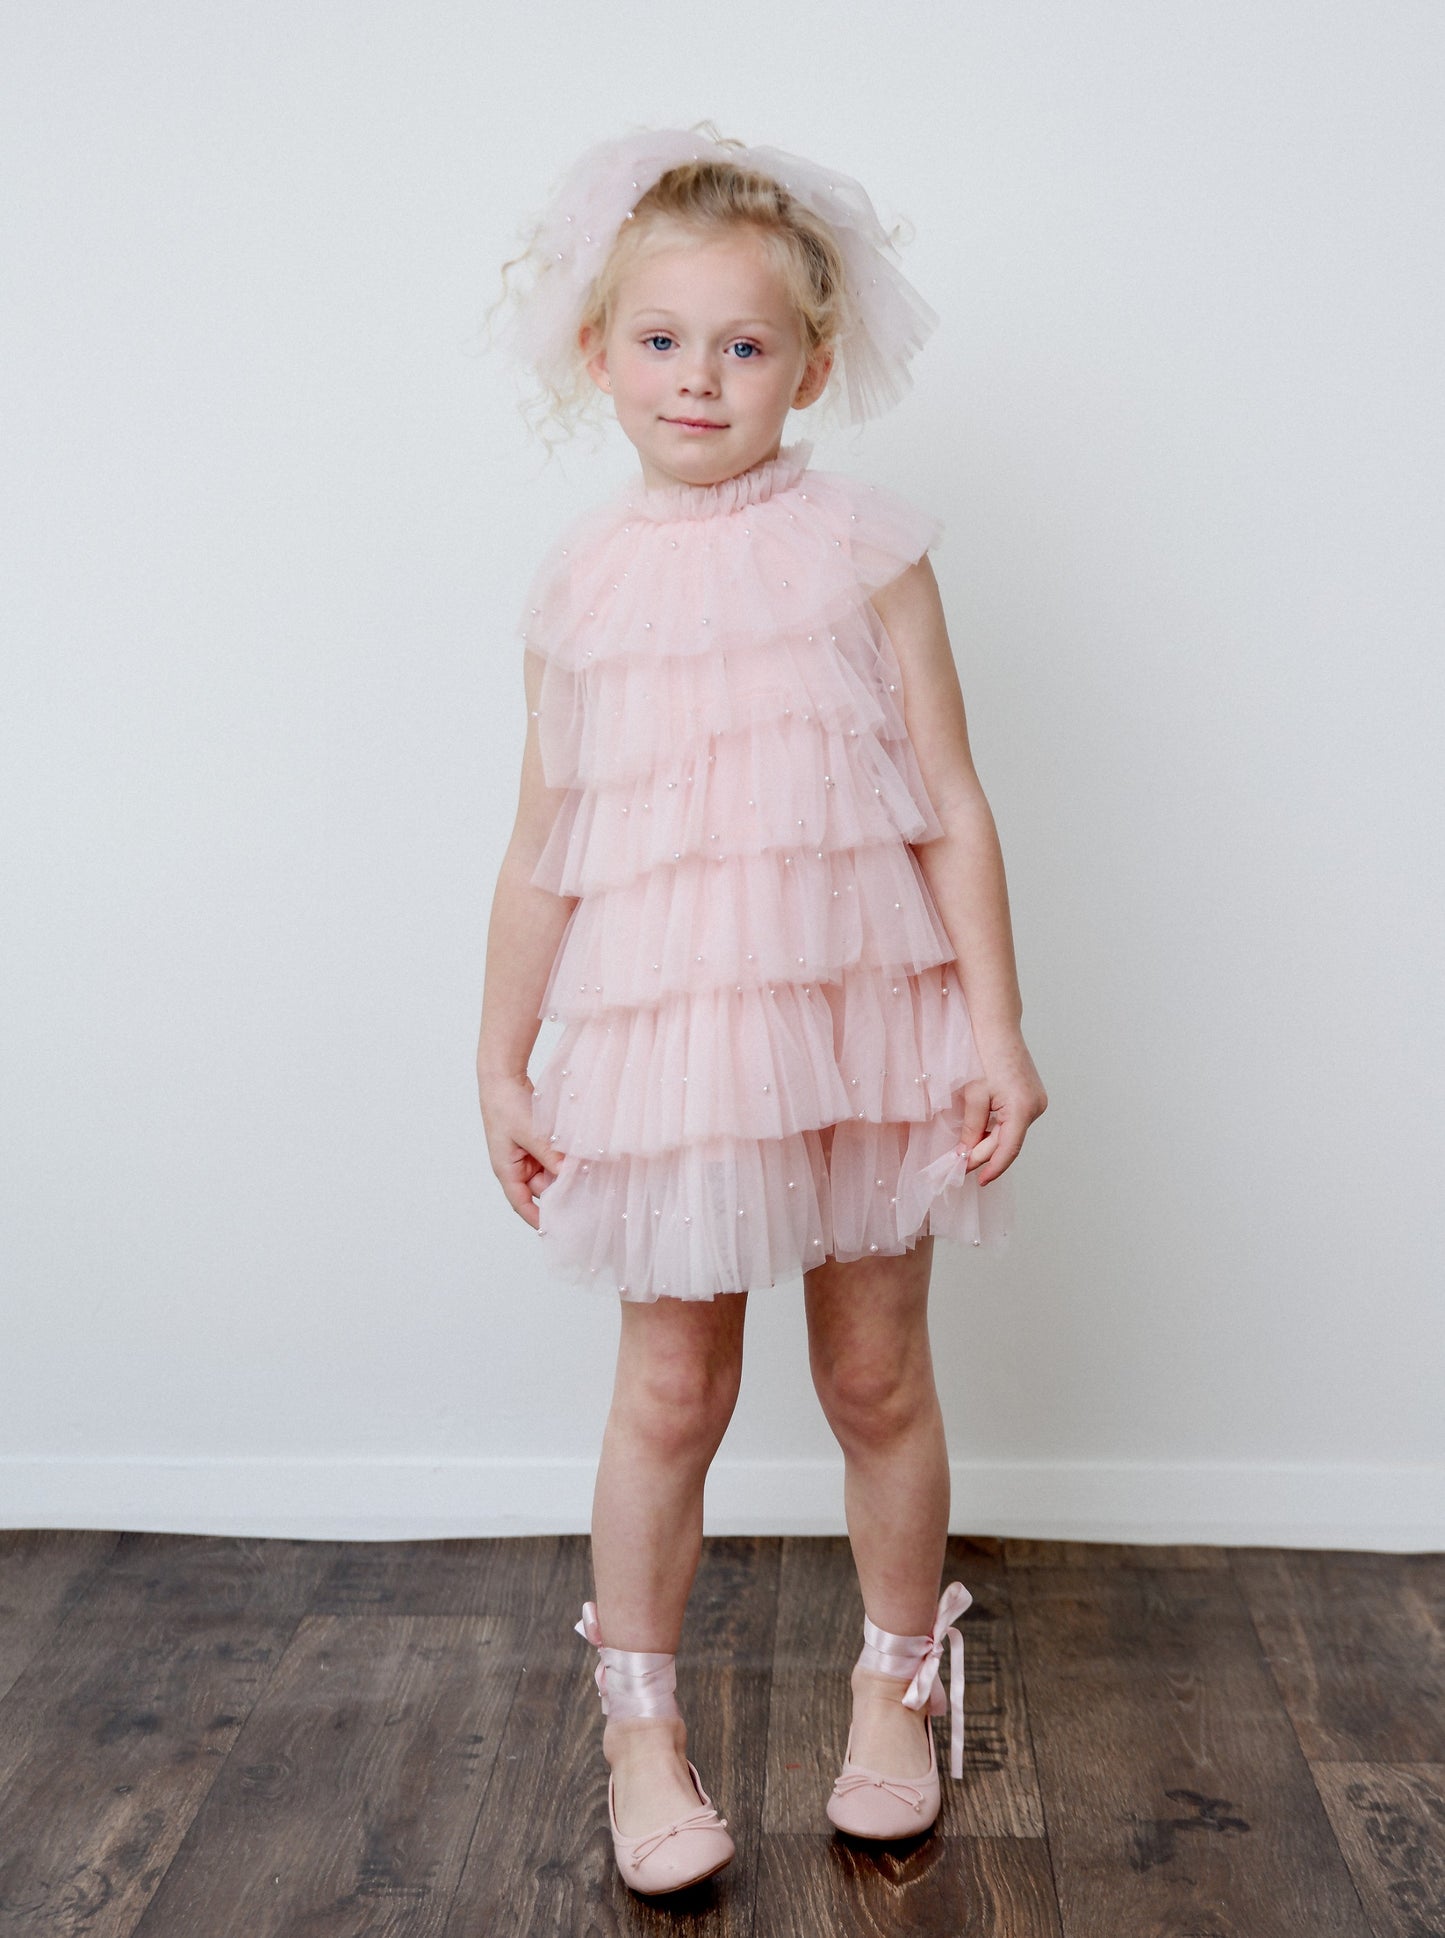 DOLLY® PEARL TUTULLY TIERED TULLE TUTU DRESS dollypink  ⚪